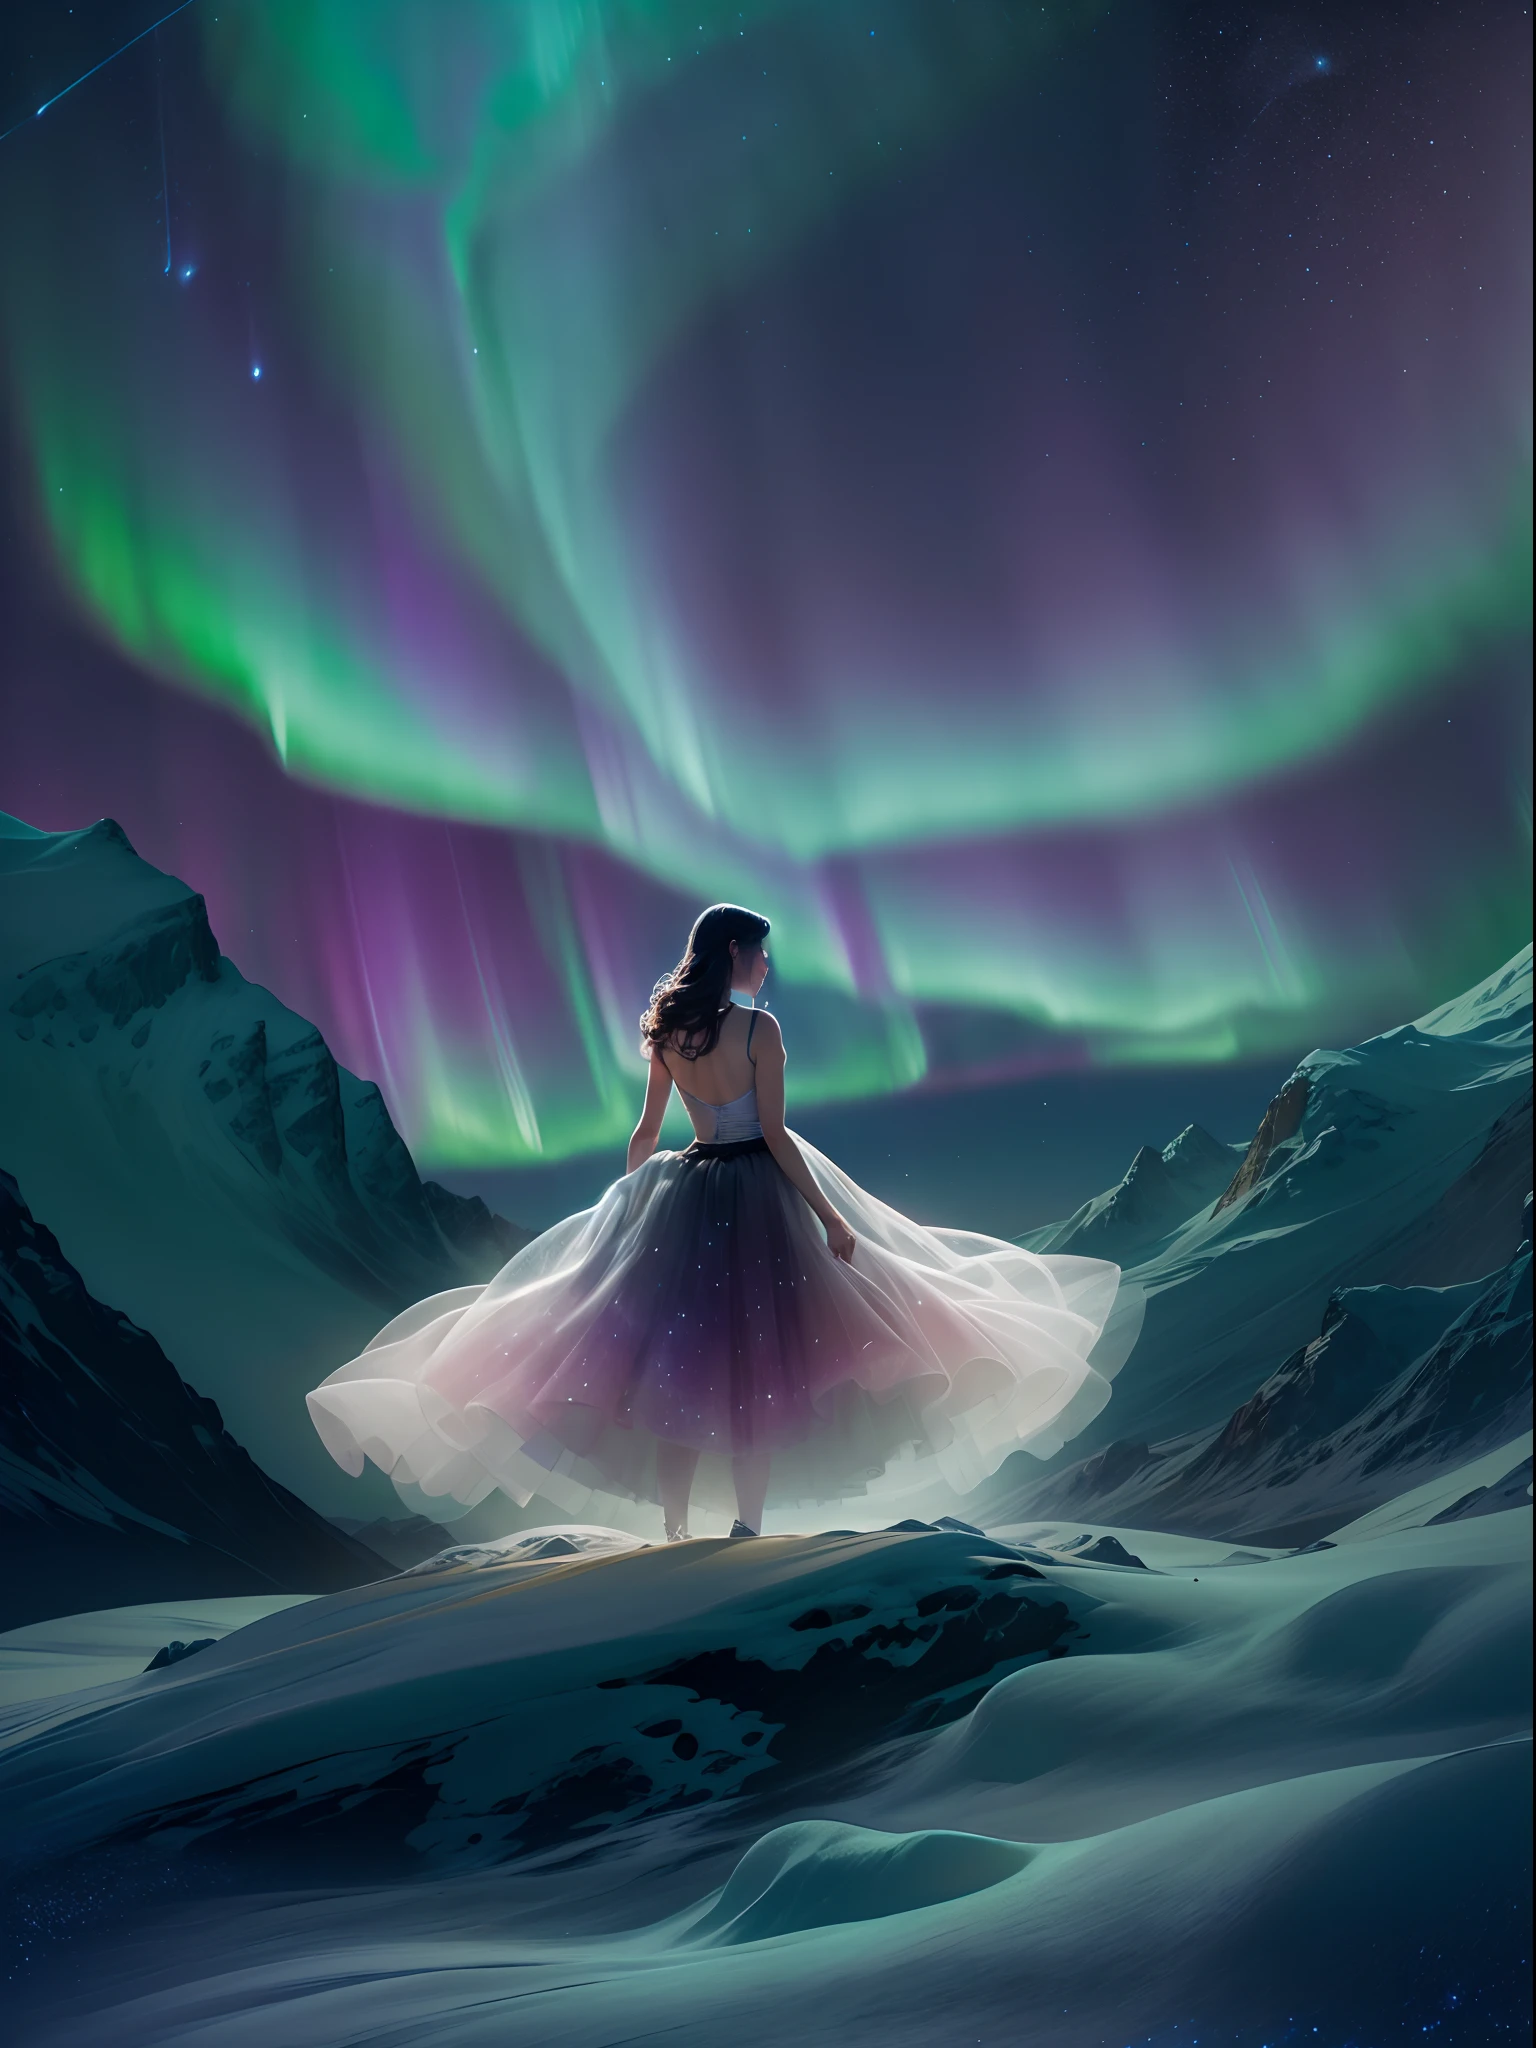 （Ballet girl spinning and dancing in the Northern Lights）, (Wear a white tutu:0.8)，（Whirling dance：0.5）， (There are multiple layers of tulle maxi skirt on top），（Girl back:0.5），（The Northern Lights merge on the girl's body），Smart，dream magical，
Green and purple Northern Lights meteor showers drill in the mountains, dramatic aurora borealis, northern lights background, Northern Lights on the background, aurora borealis, northern lights background, Magnificent background, with aurora borealis in the sky, The Northern Lights in space in surreal and dreamlike landscape style, Light black and emerald,  8K resolution,  minimalistbackground, From an upward point of view，ultraclear